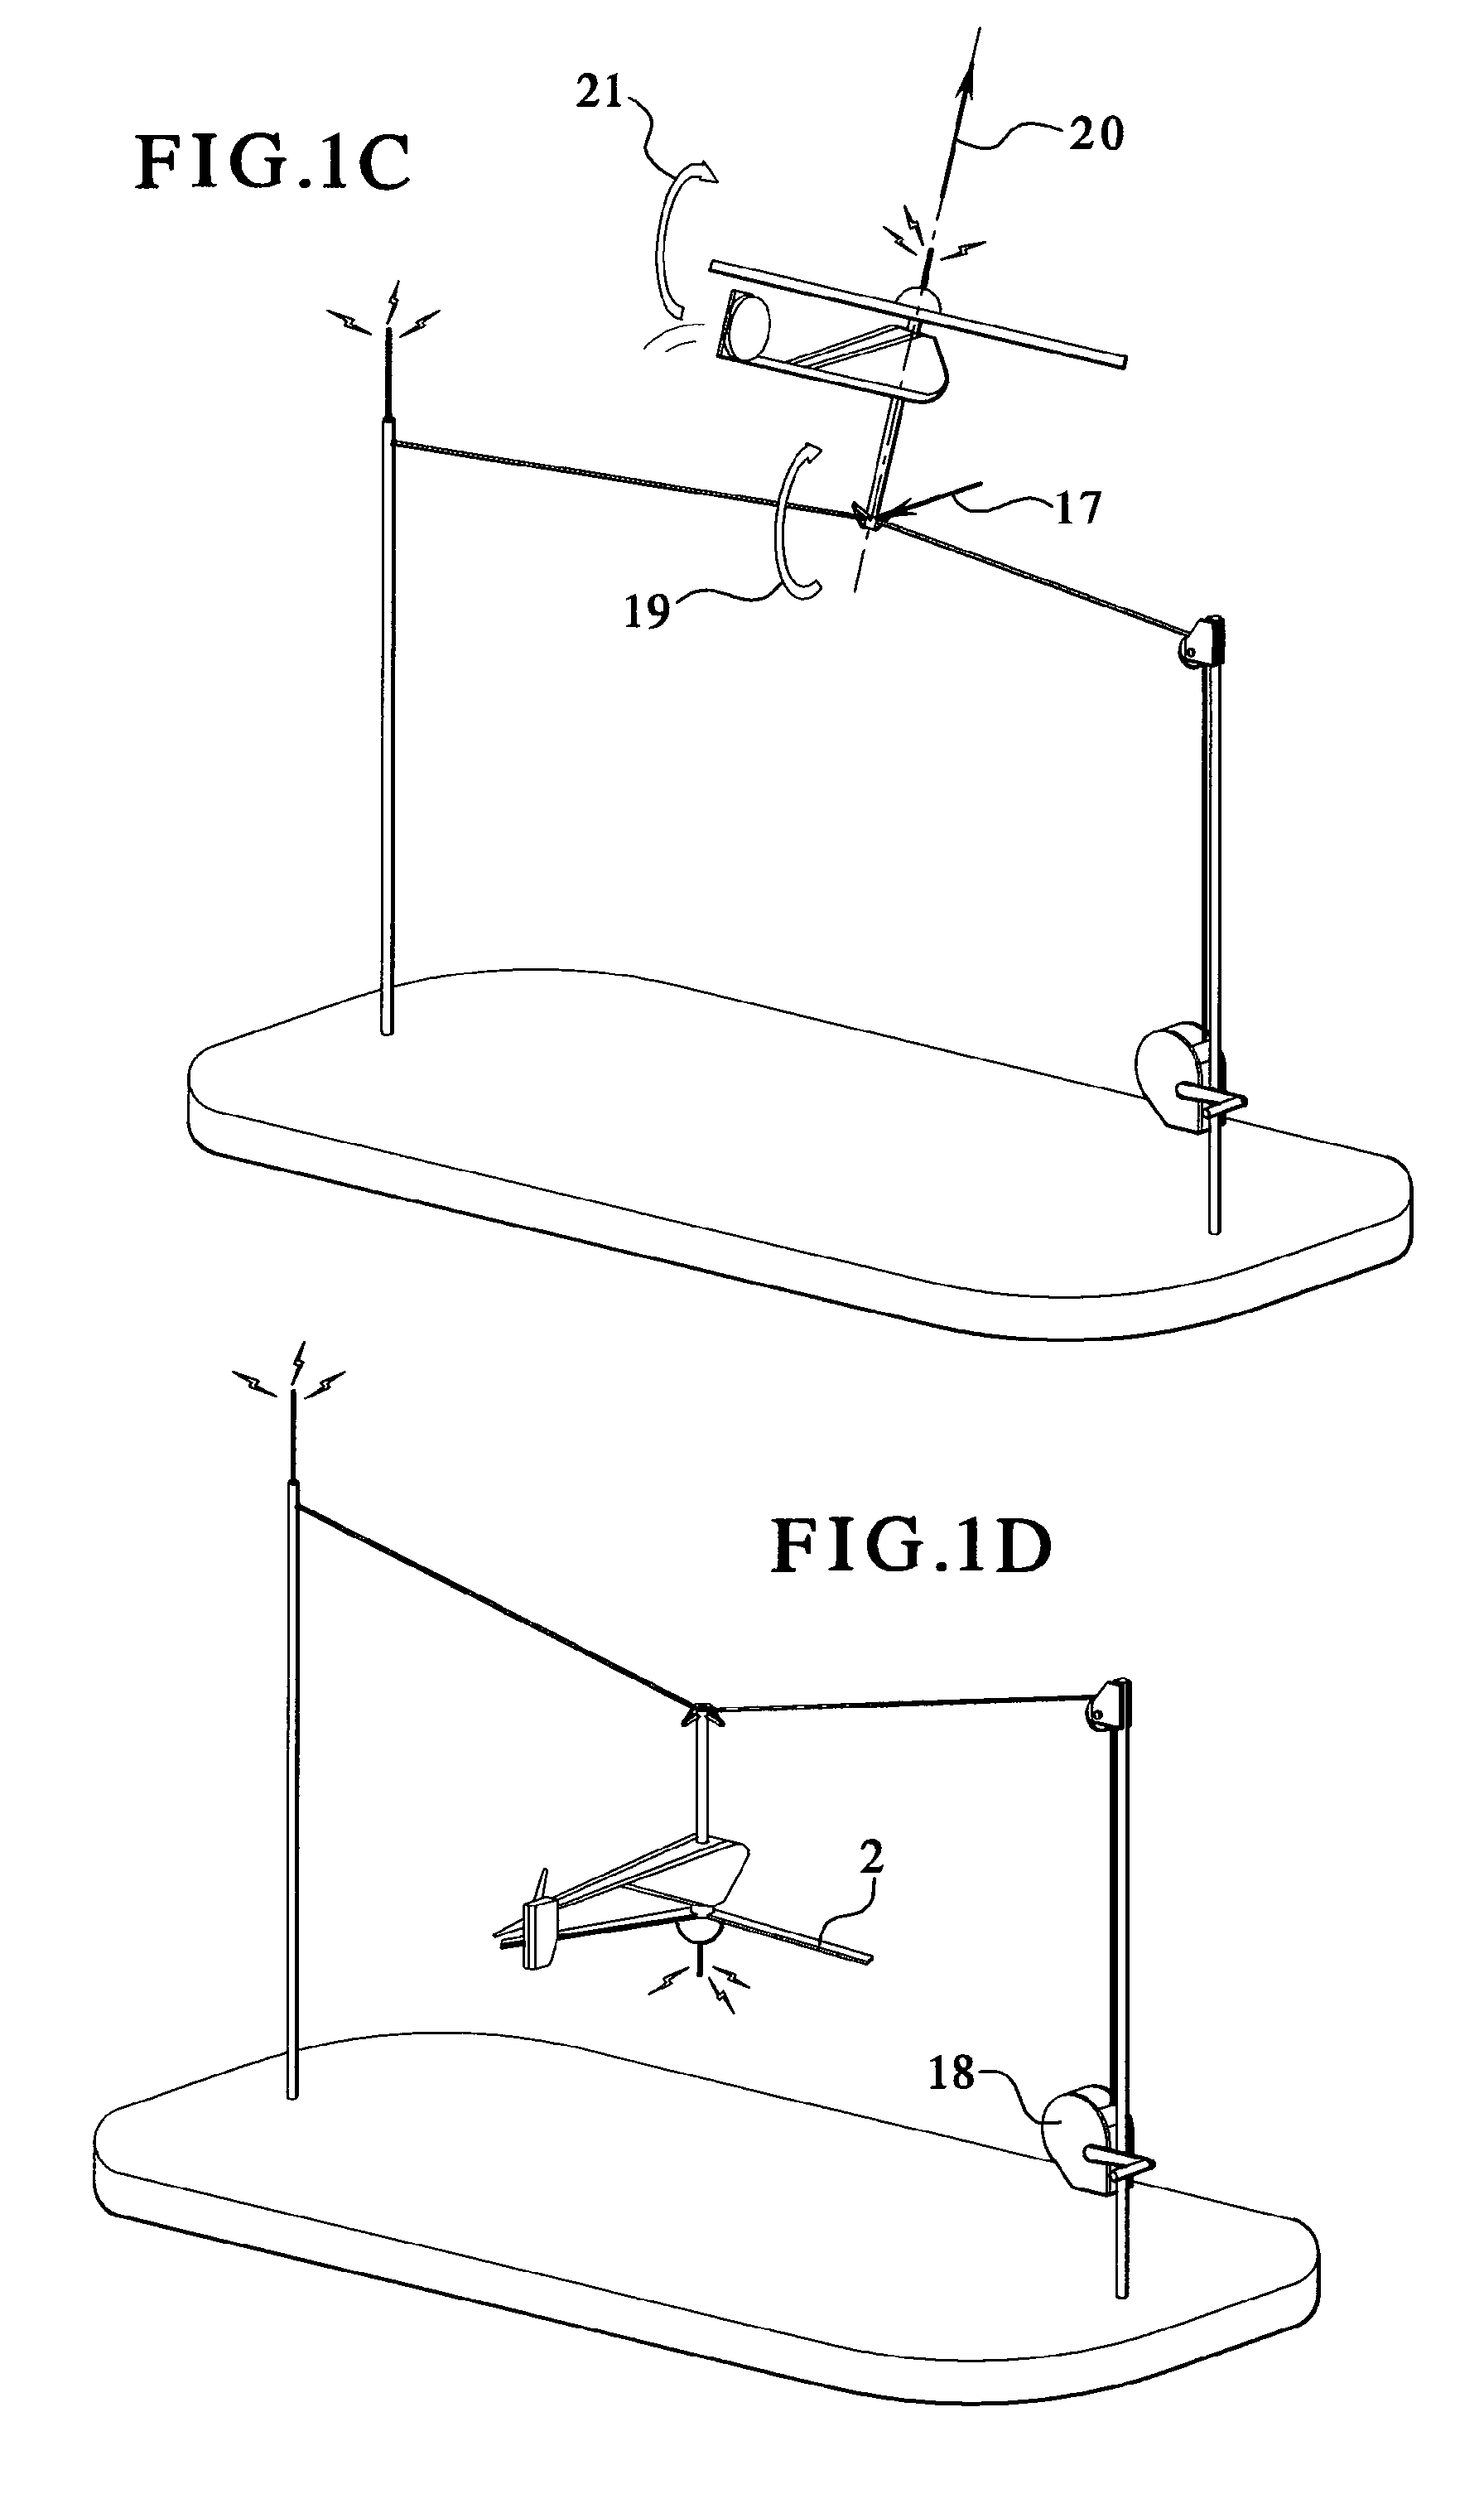 Method and apparatus for retrieving a hovering aircraft